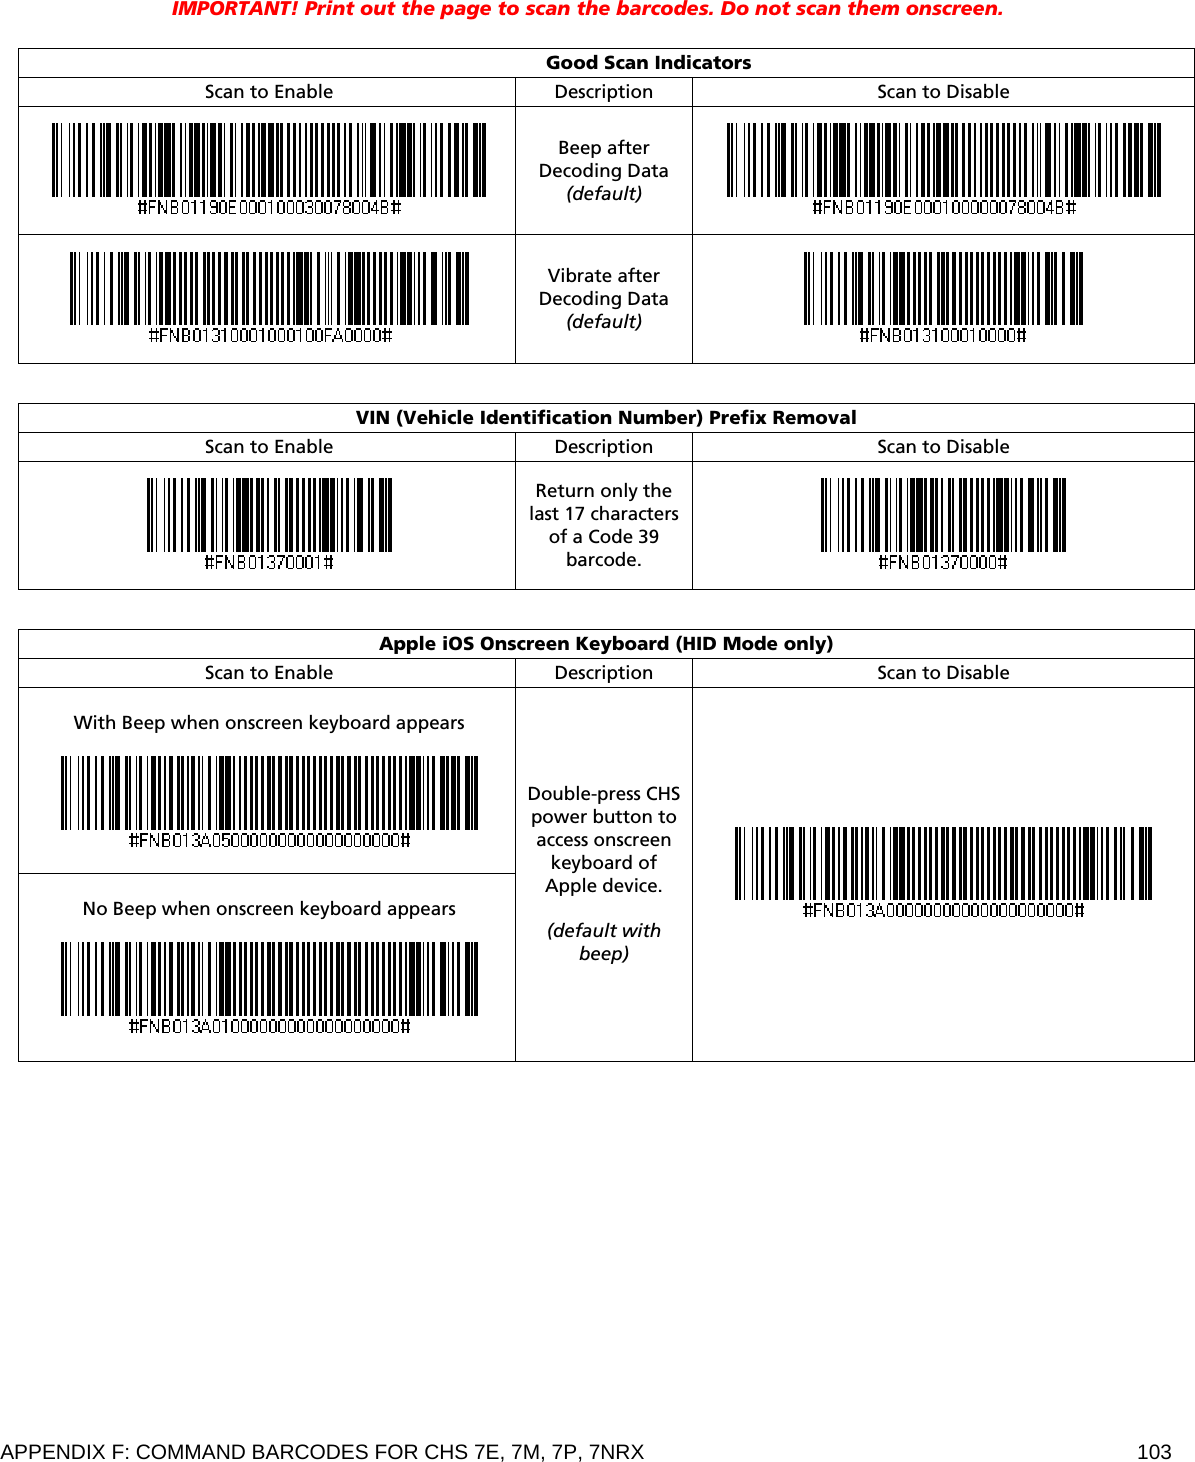 APPENDIX F: COMMAND BARCODES FOR CHS 7E, 7M, 7P, 7NRX  103  IMPORTANT! Print out the page to scan the barcodes. Do not scan them onscreen.   Good Scan Indicators Scan to Enable Description  Scan to Disable  Beep after Decoding Data (default)    Vibrate after Decoding Data (default)    VIN (Vehicle Identification Number) Prefix Removal Scan to Enable Description  Scan to Disable  Return only the last 17 characters of a Code 39 barcode.    Apple iOS Onscreen Keyboard (HID Mode only) Scan to Enable Description  Scan to Disable  With Beep when onscreen keyboard appears     No Beep when onscreen keyboard appears    Double-press CHS power button to access onscreen keyboard of Apple device.  (default with beep)     